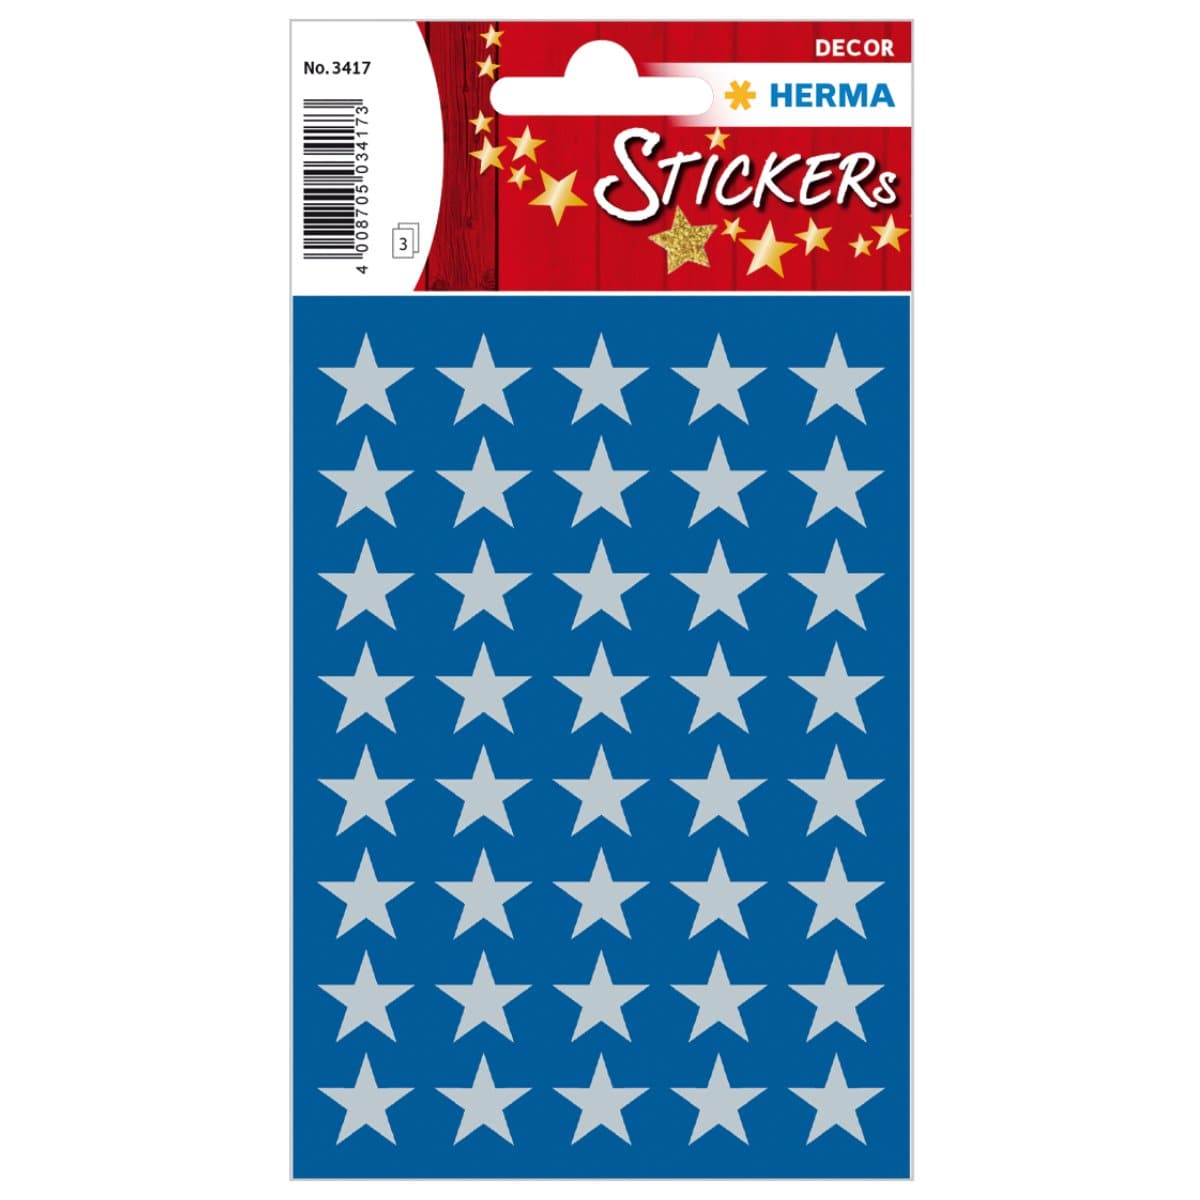 Herma Decor Stickers STARS, 13 mm, 120/pack, Silver